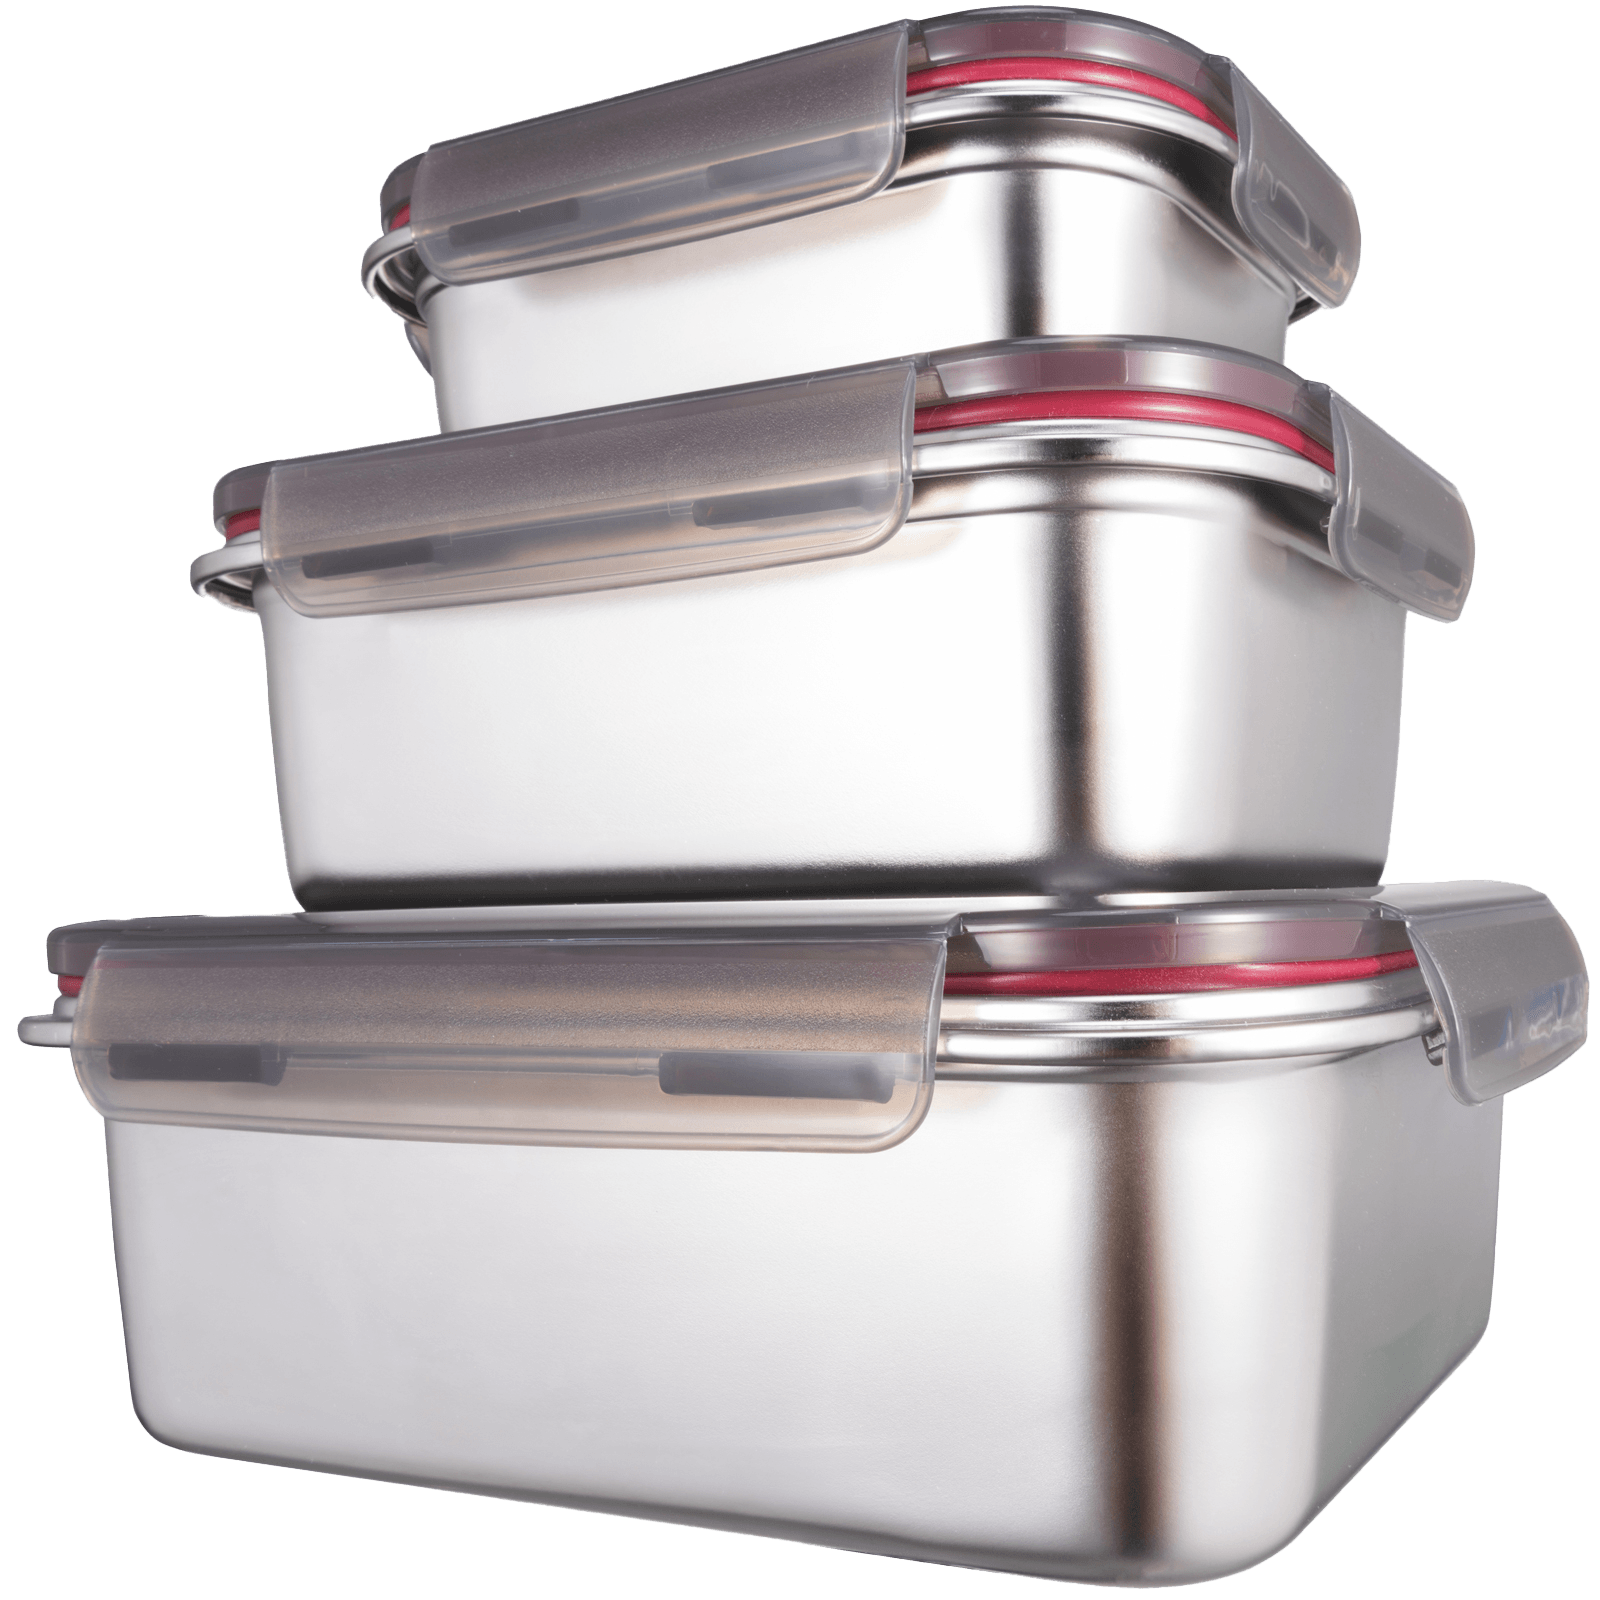 3 PC Stainless Steel Container Set With Locking Lids - GenicookGenicook